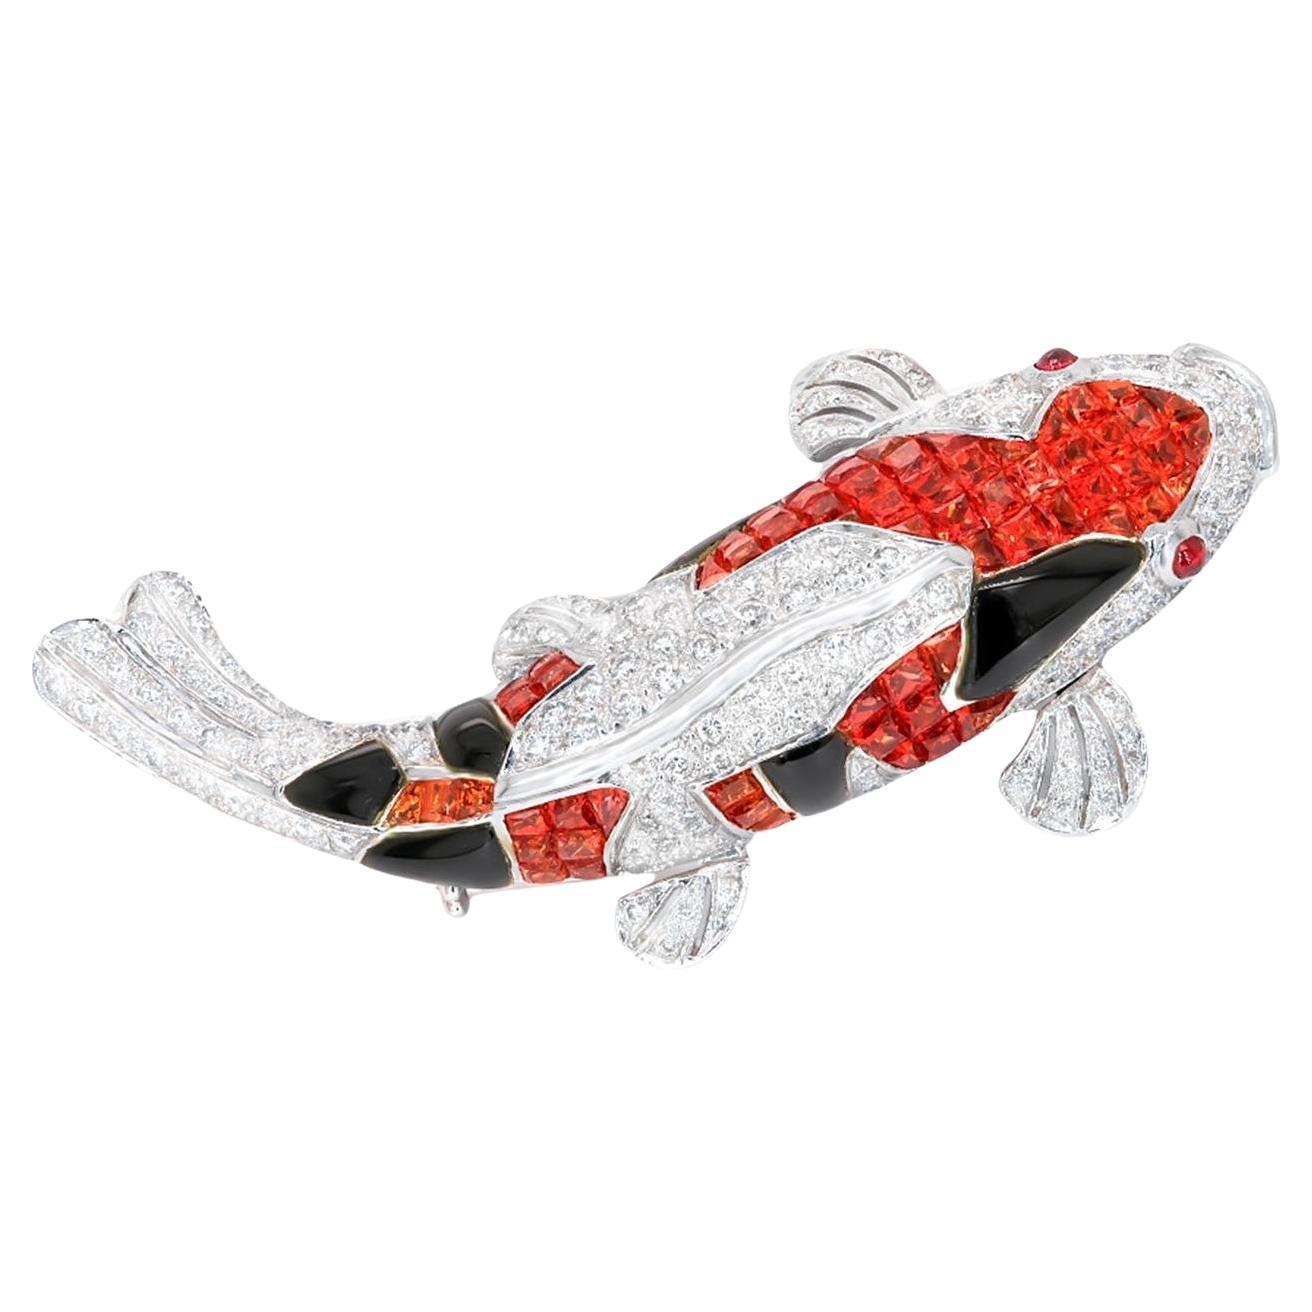 Koi Fish Brooch Sapphires Rubies Diamonds 3.99 Carats 18K White Gold For Sale